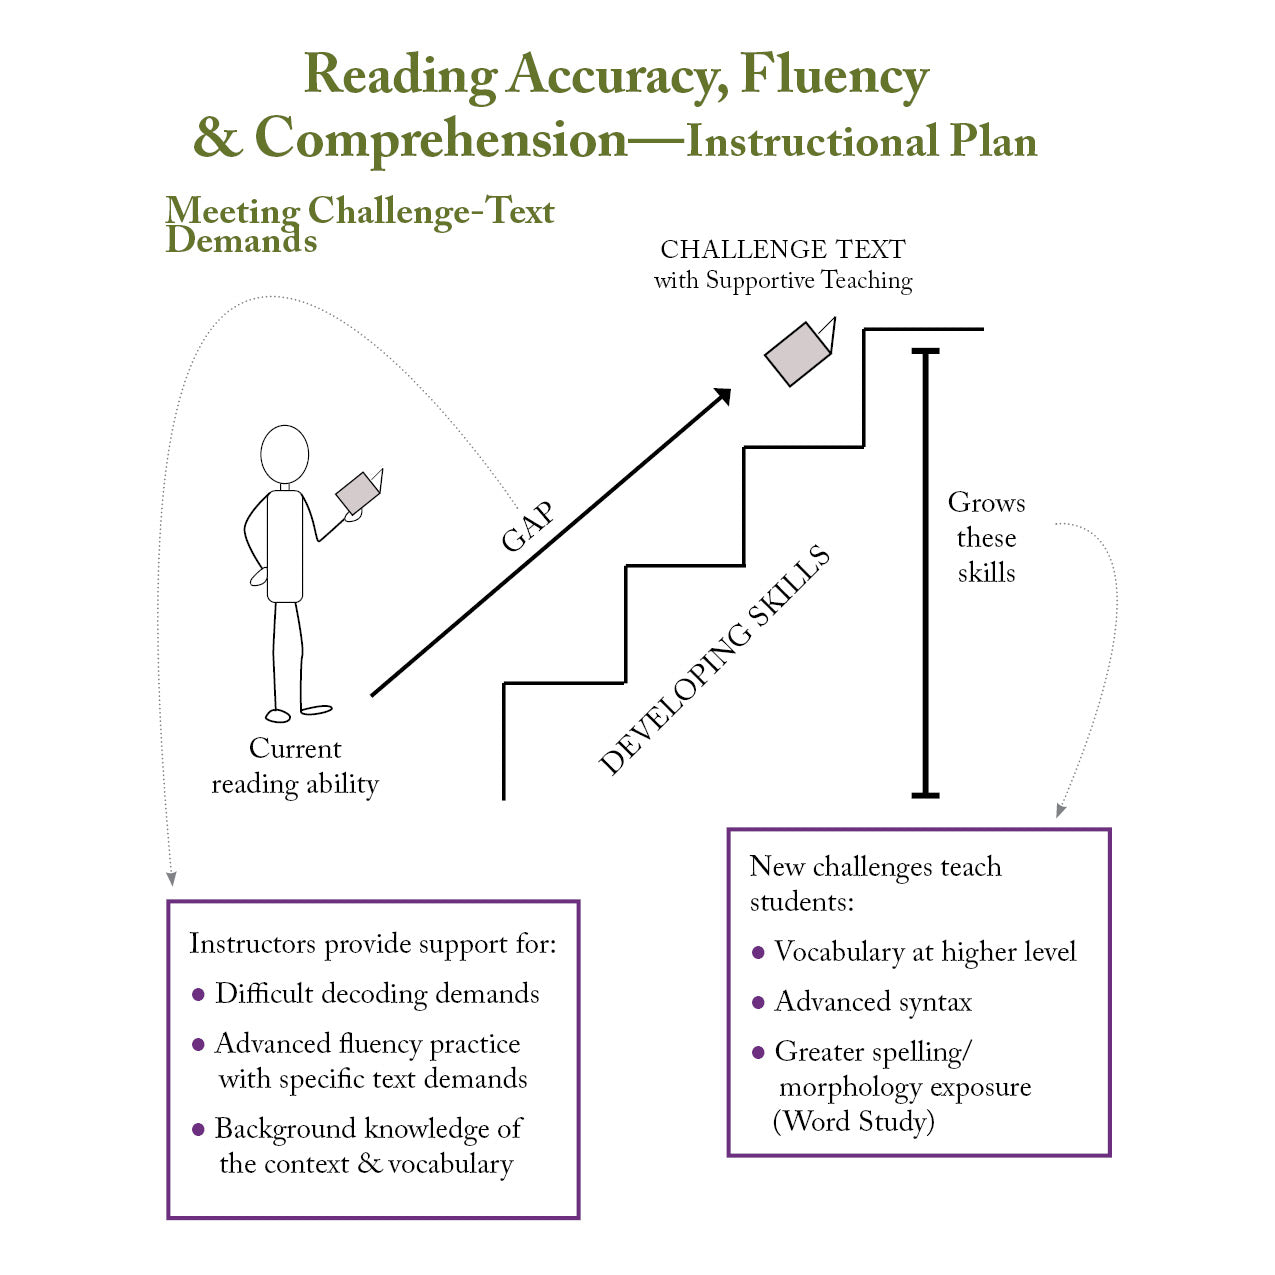 Reading Accuracy, Fluency & Comprehension Educator Class